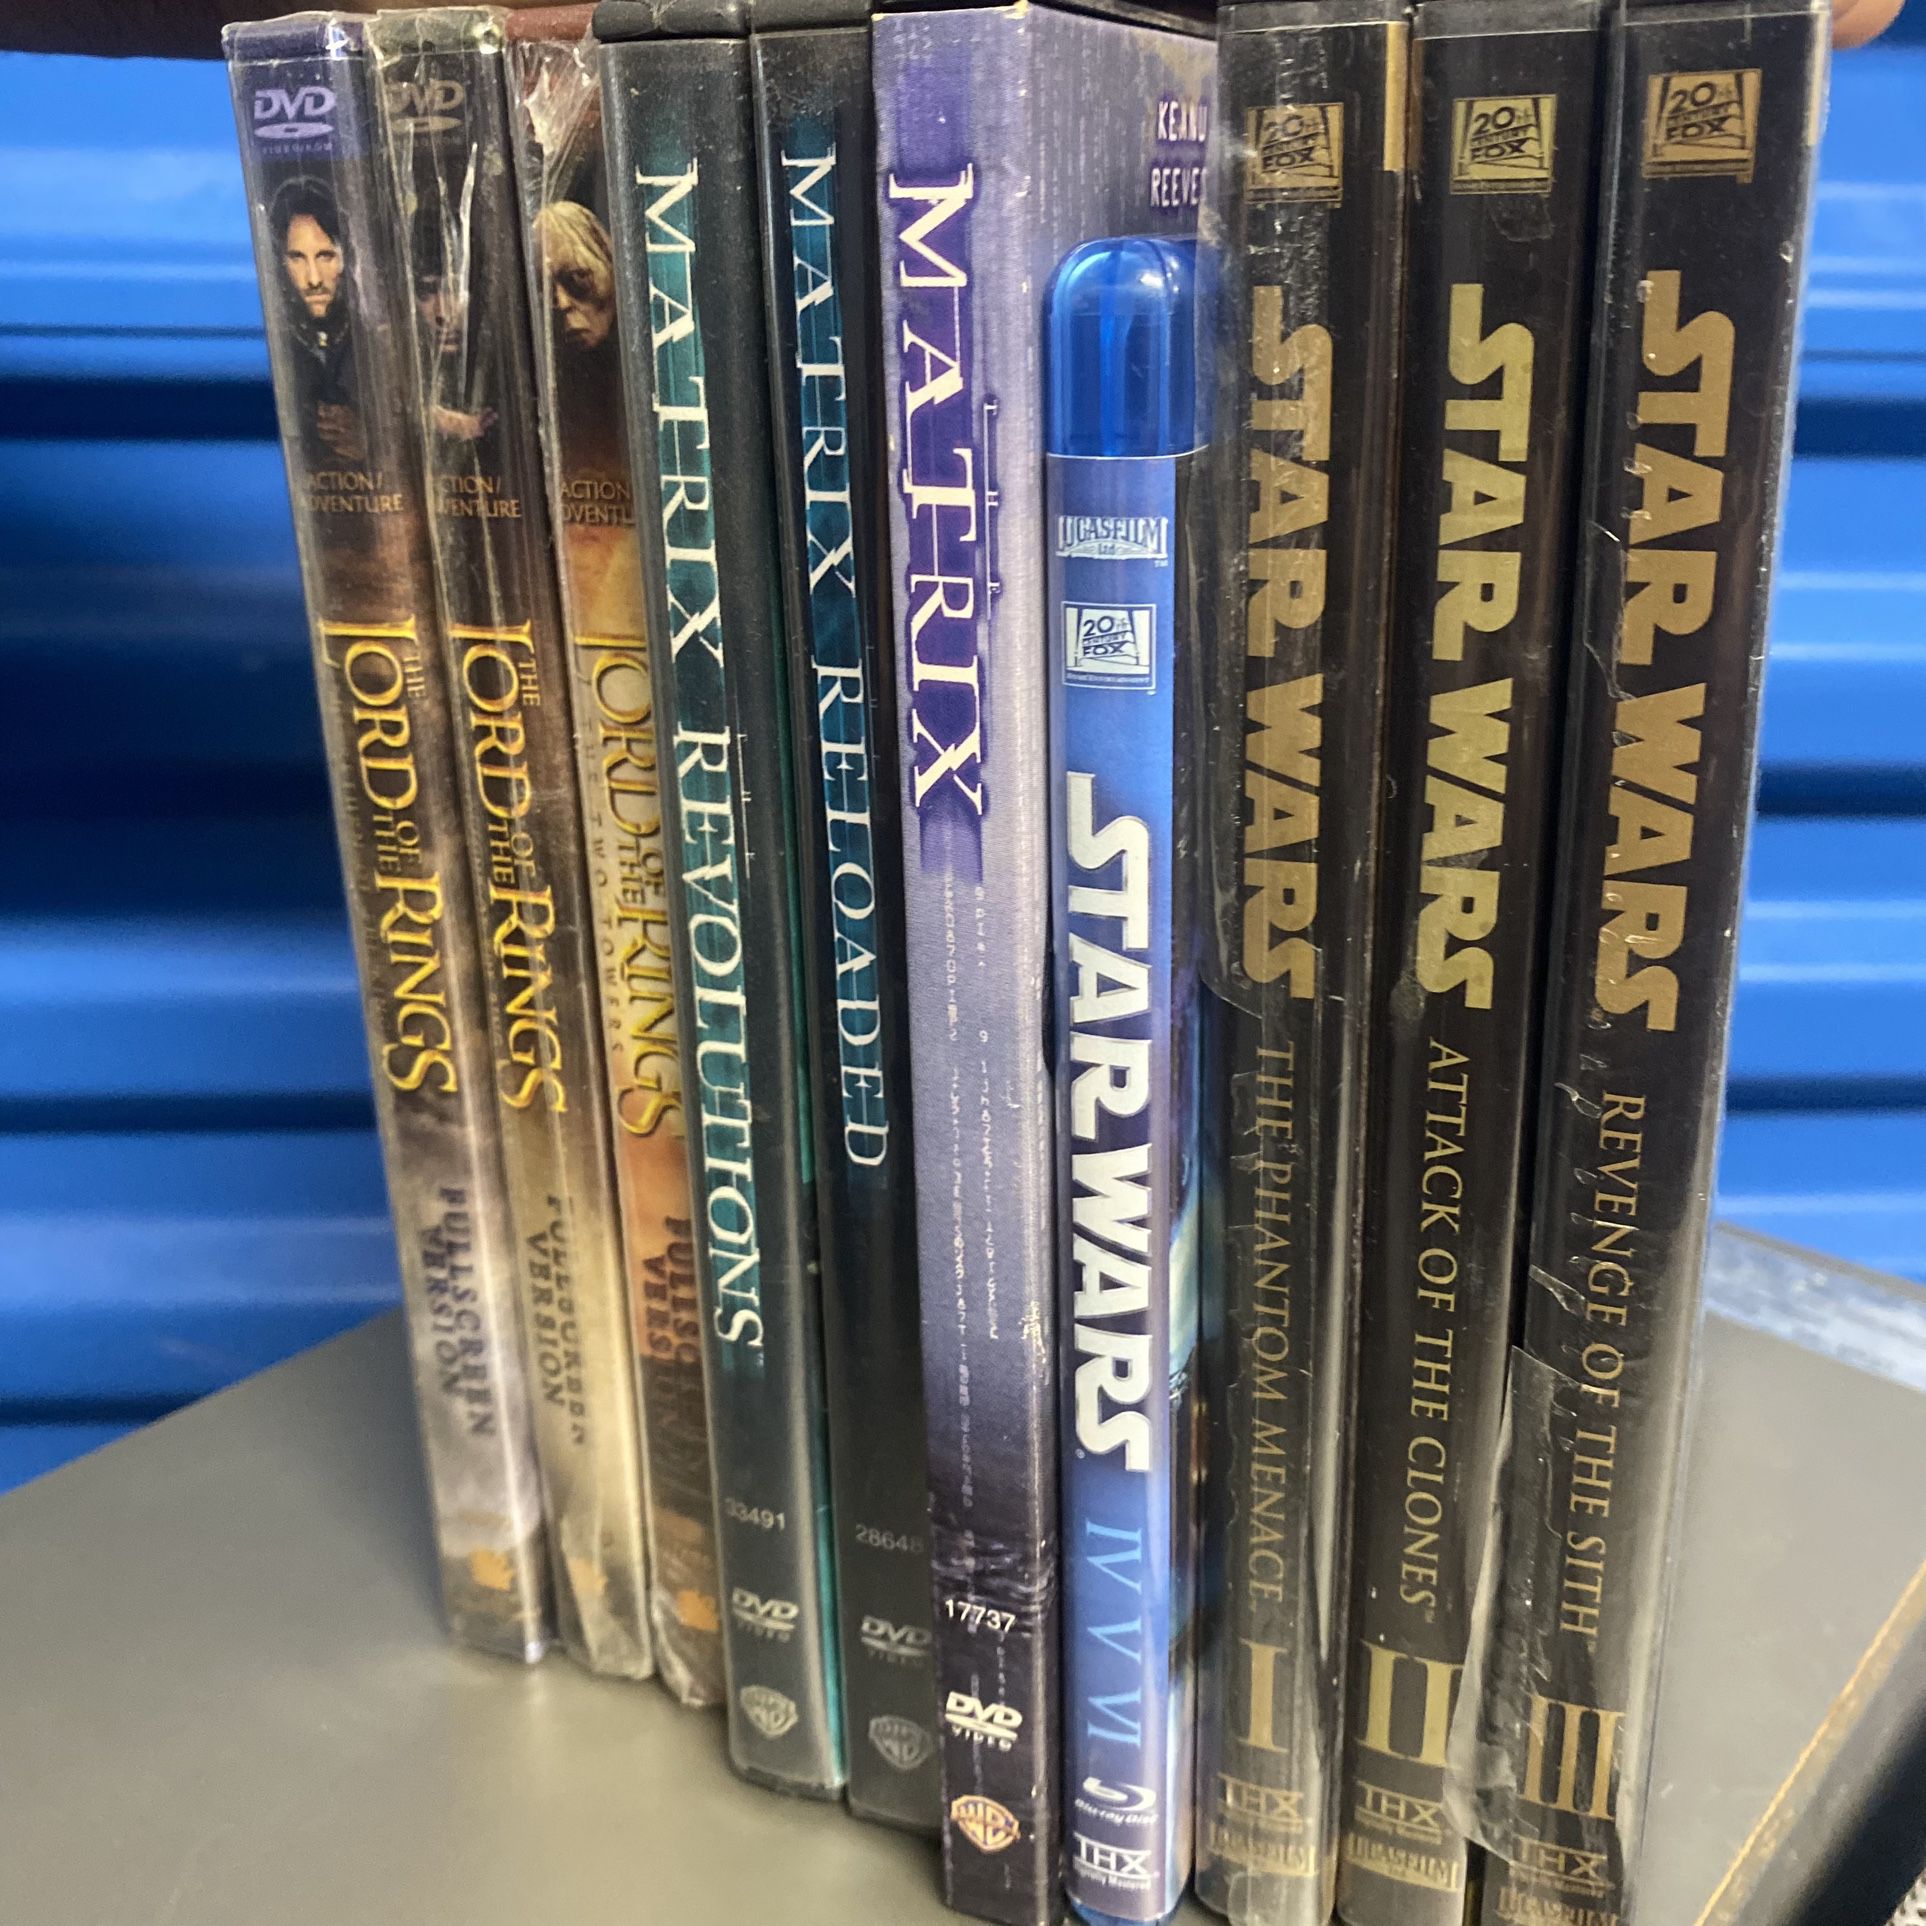 New DVDs Trilogy Matrix Both Star Wars And Lord Of The Rings 